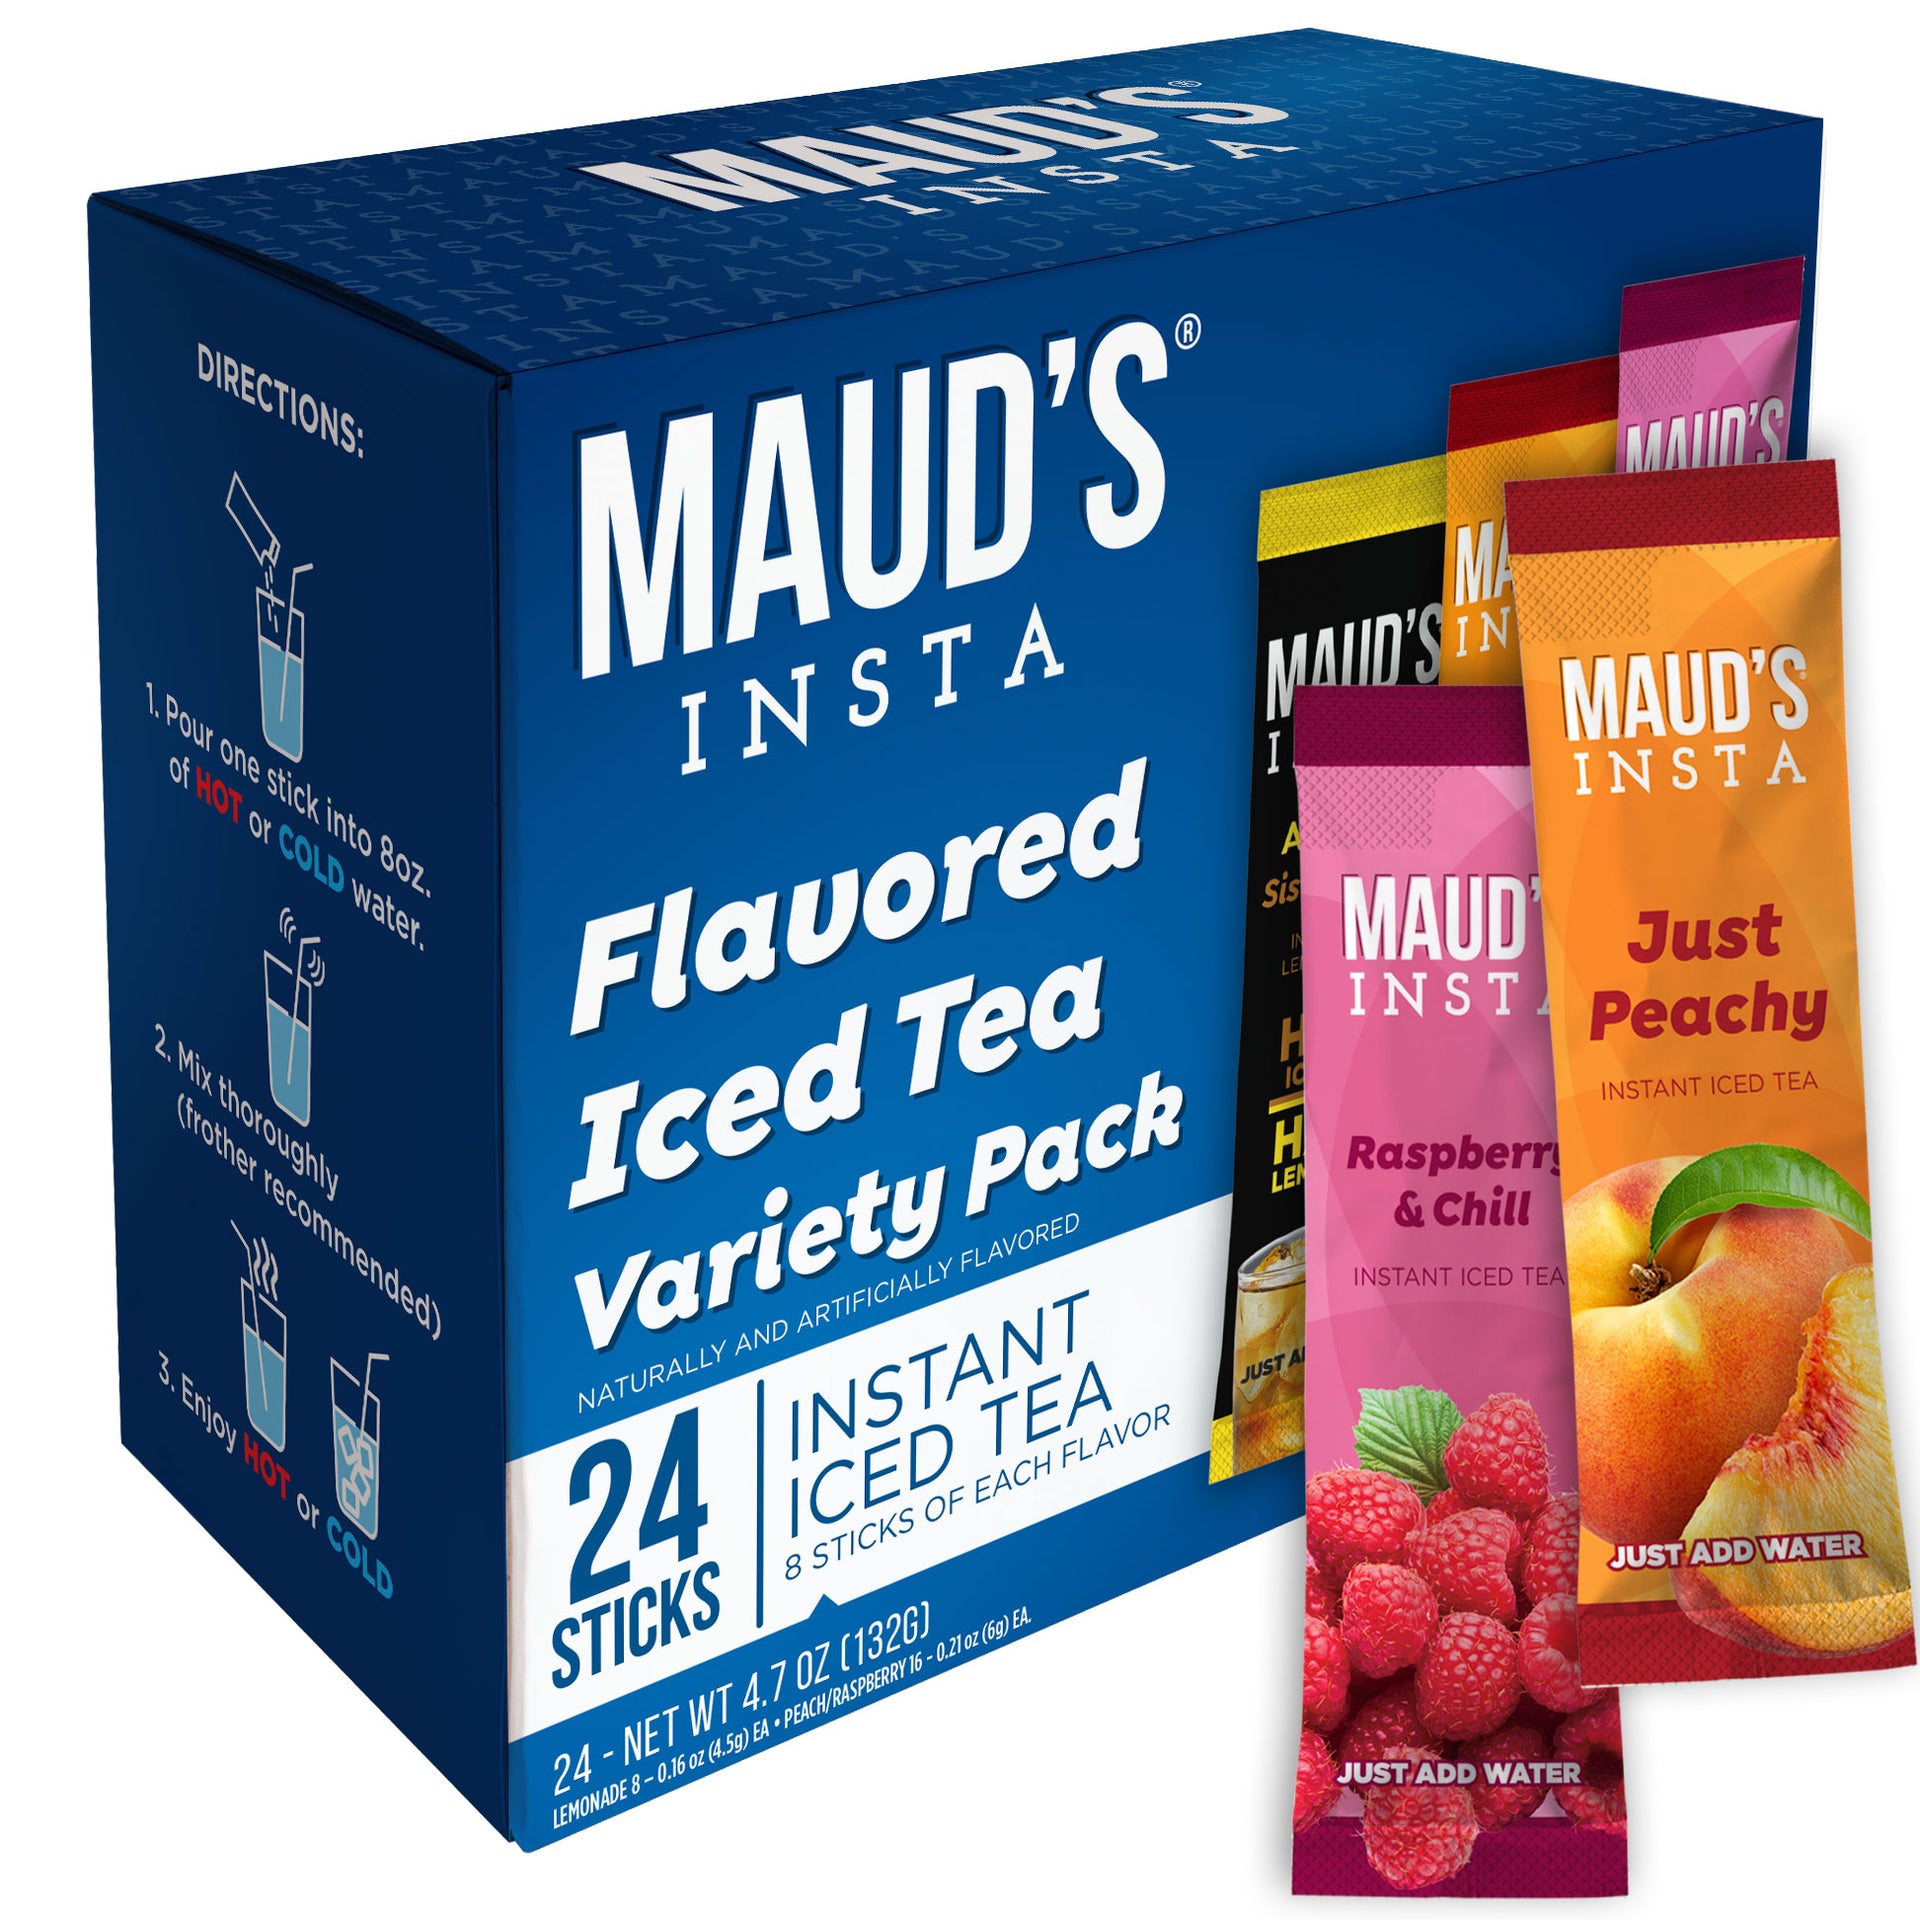 Maud's Instant Iced Tea Variety Pack